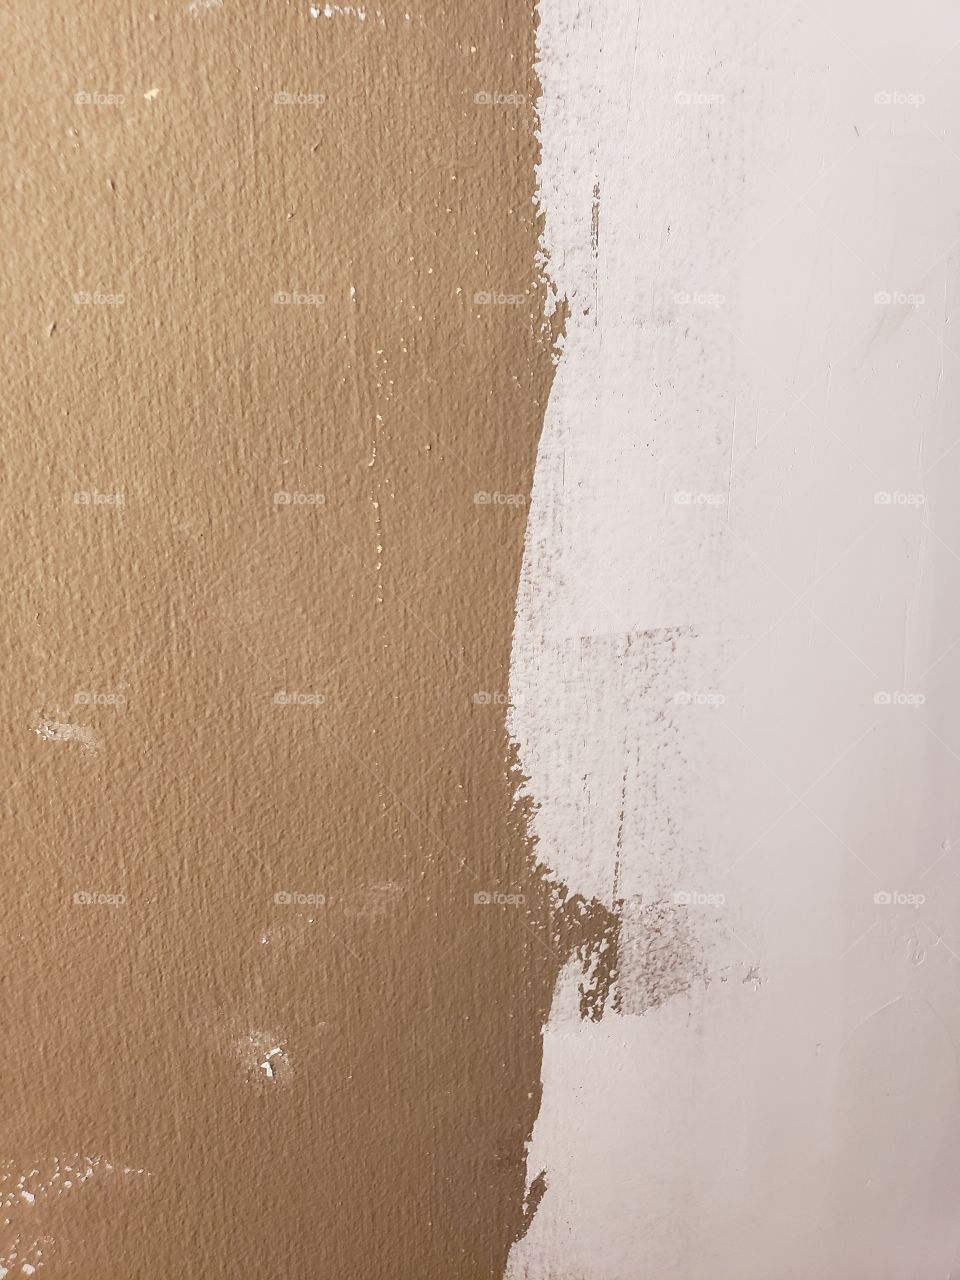 drywall plaster on old dirty painted wall